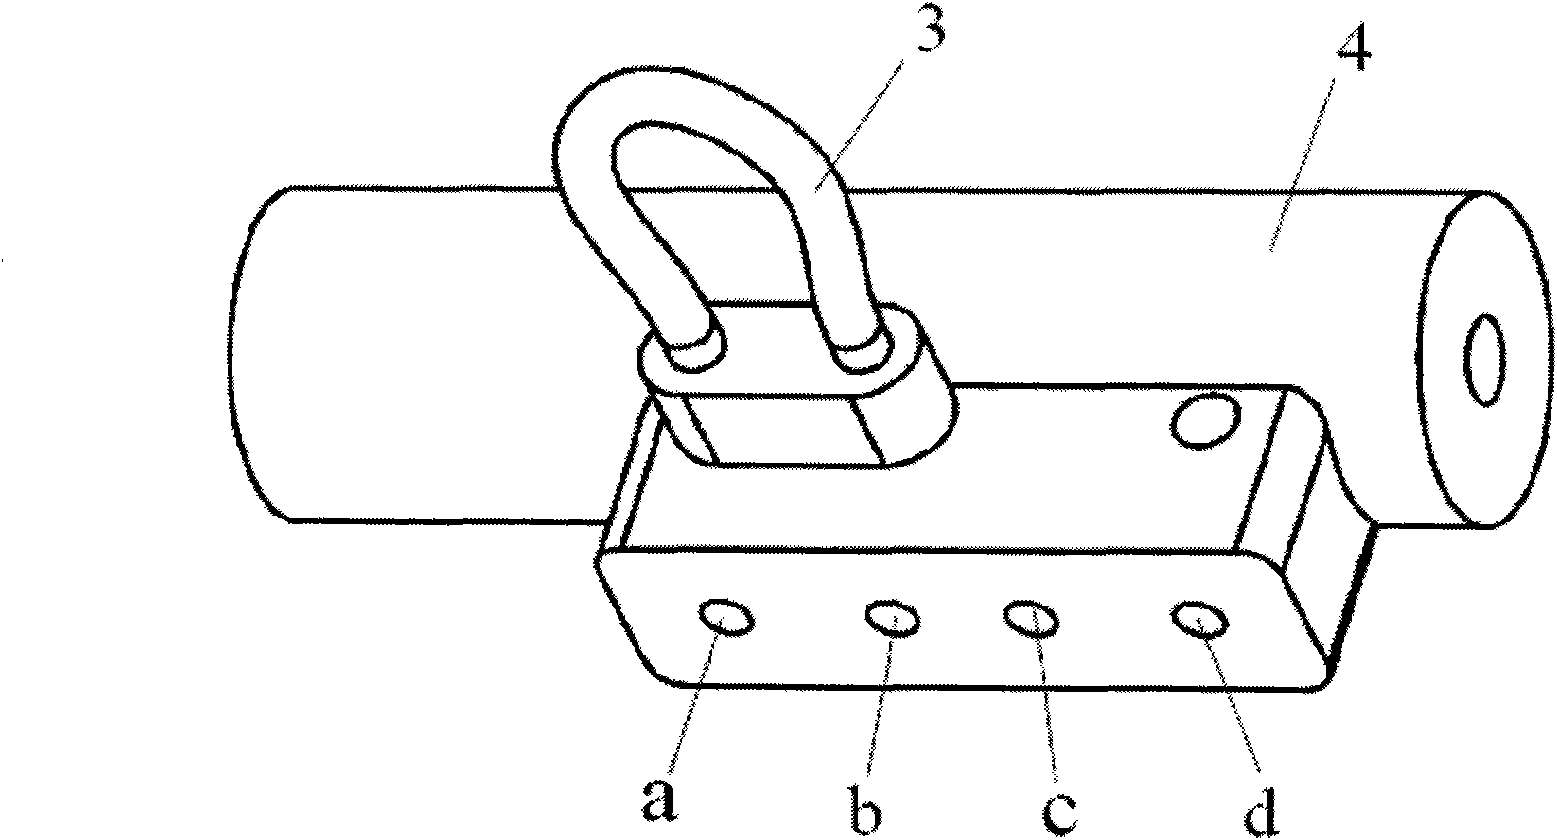 Air passage block and end-expiratory carbon dioxide monitoring module manufactured by adopting same